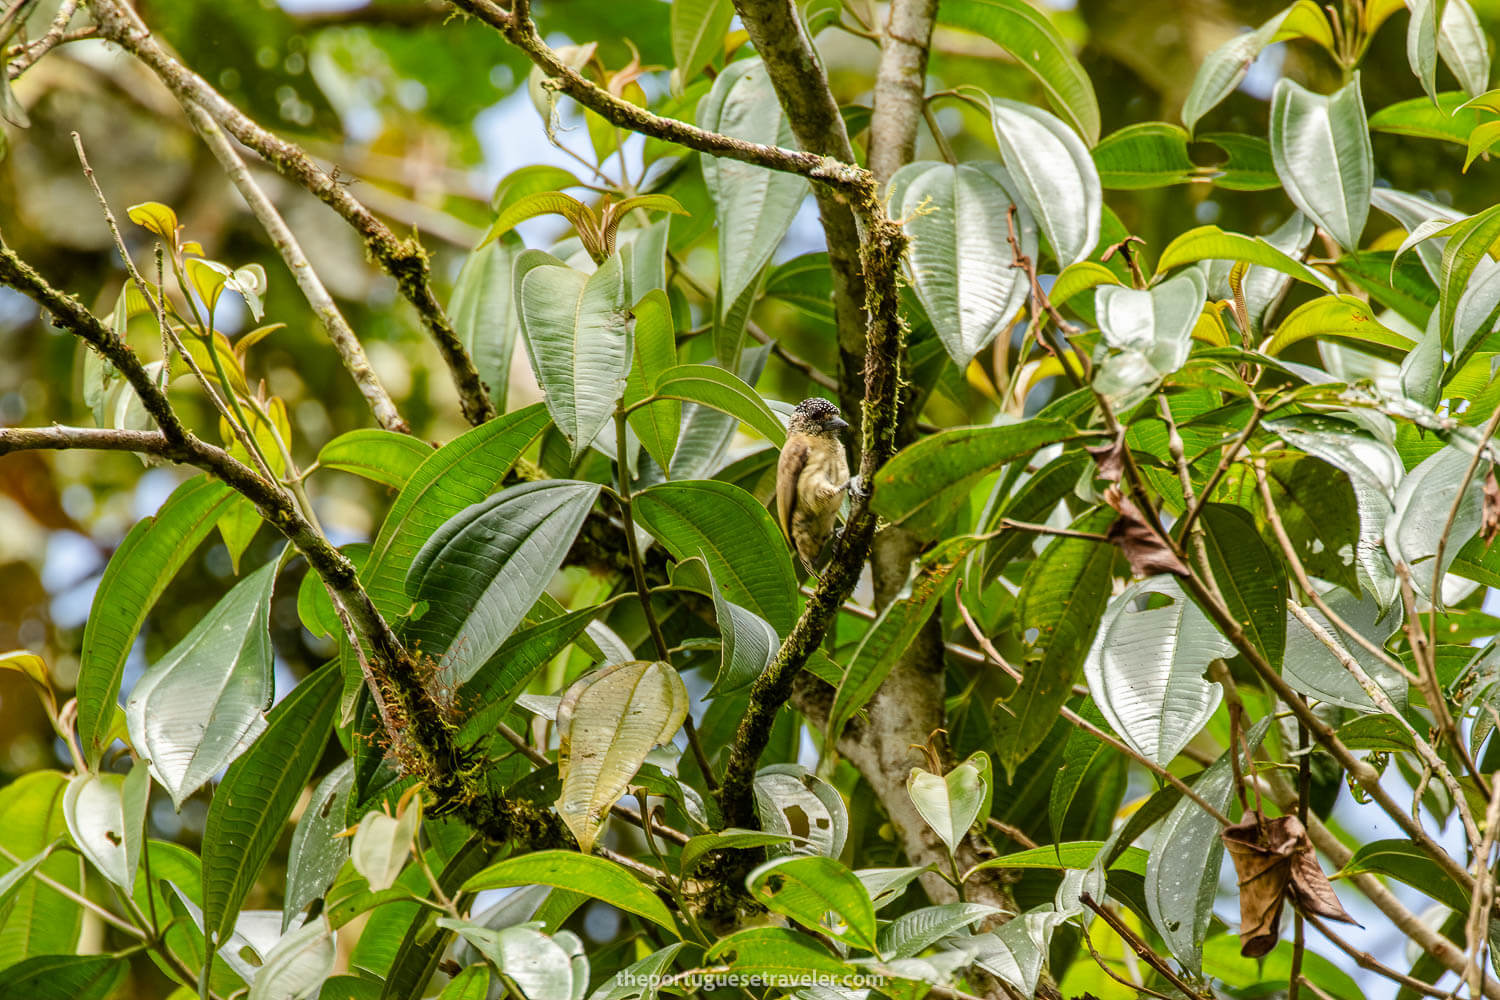 A Greyish Piculet on the Birdwatching Tour in Mindo